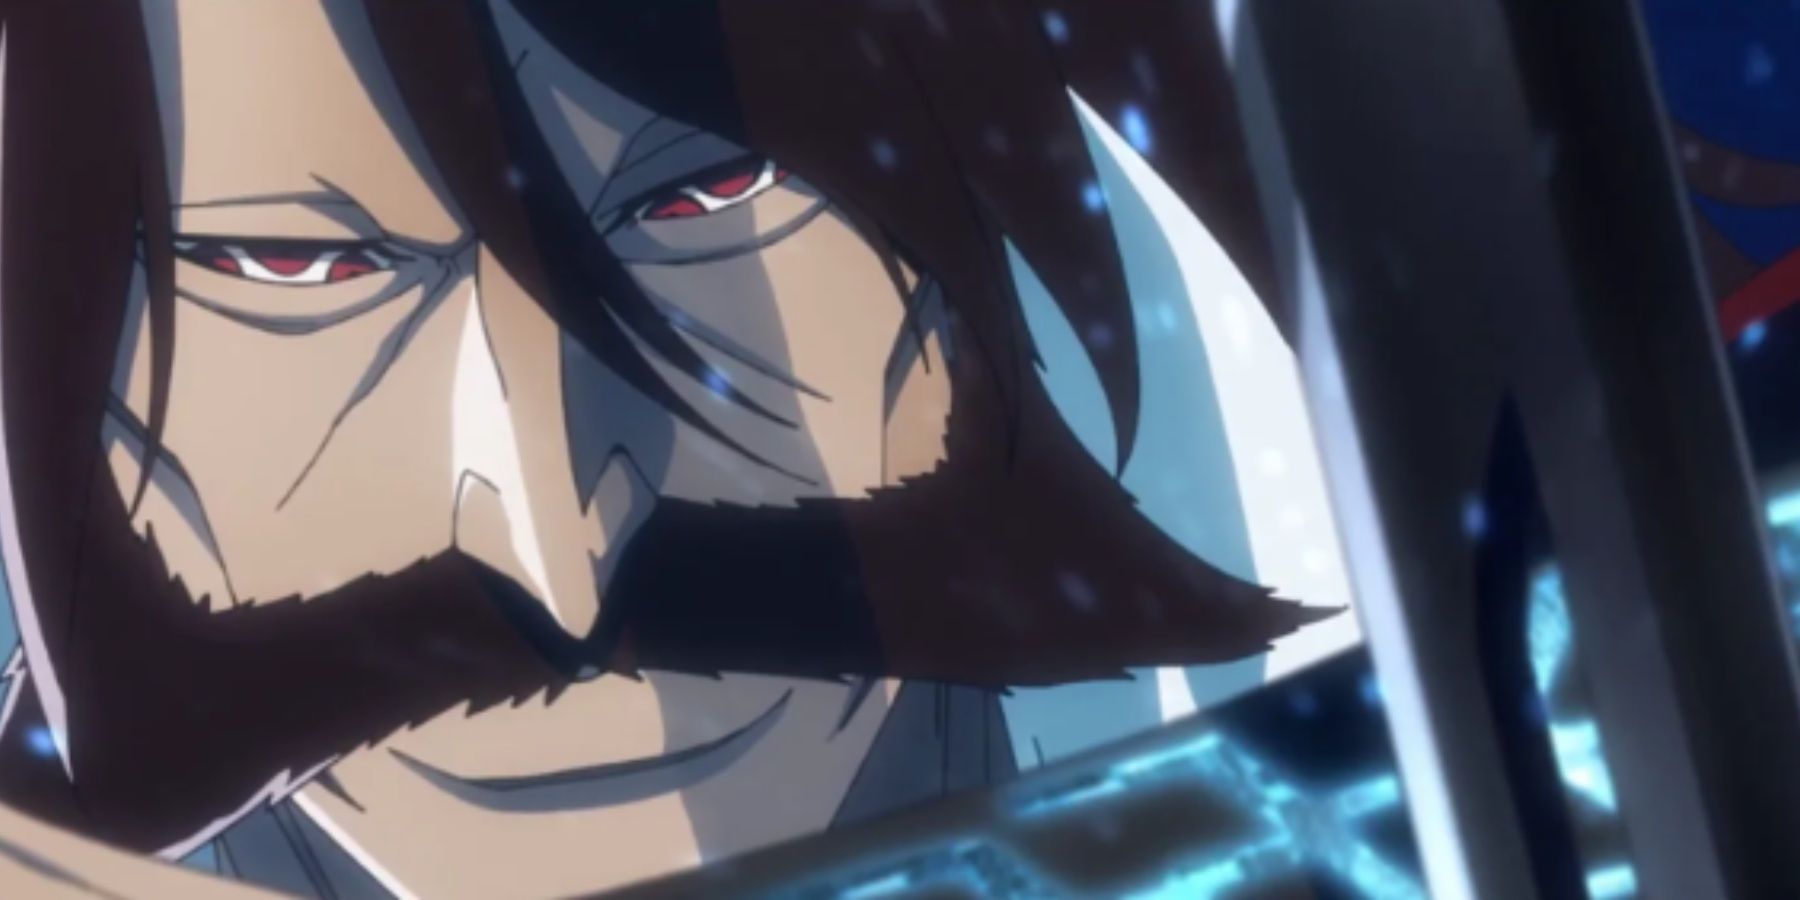 Yhwach uses The Almighty and Blut Vein against Ichigo in the latest trailer of Bleach: The Thousand-Year Blood War